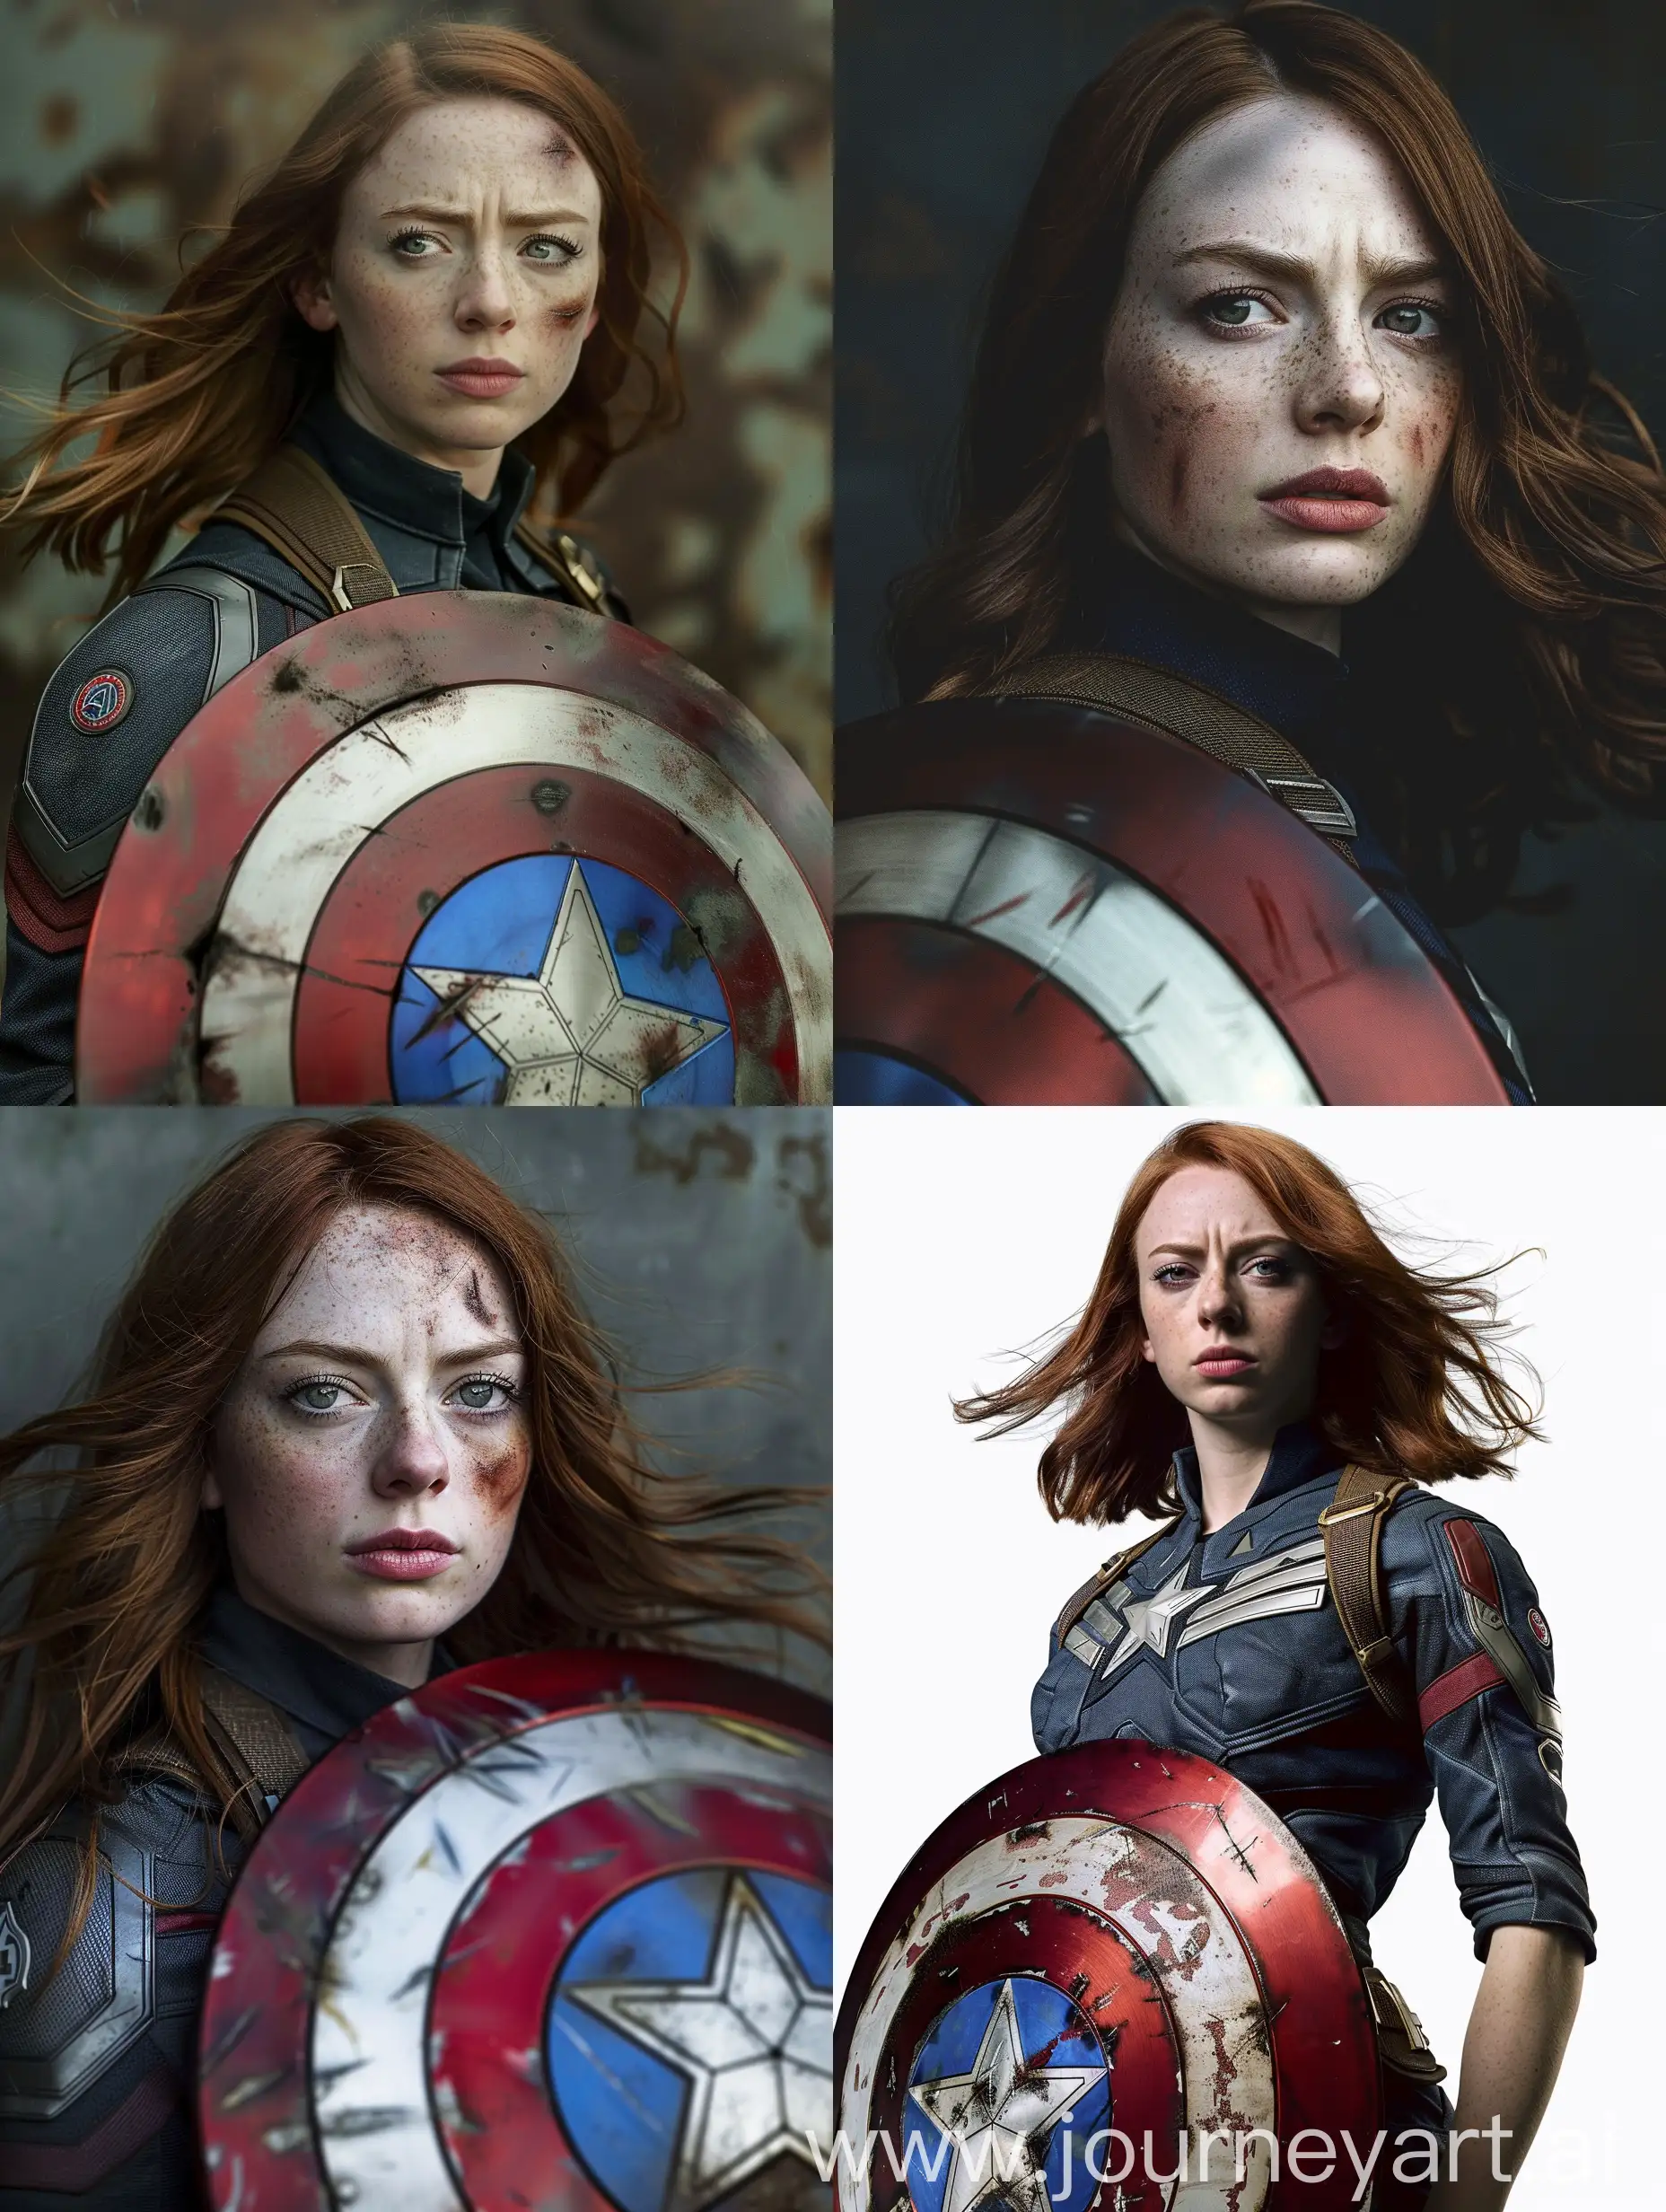 Emma-Stone-as-Captain-America-Stunning-8K-Portrait-of-the-Actress-in-Heroic-Costume